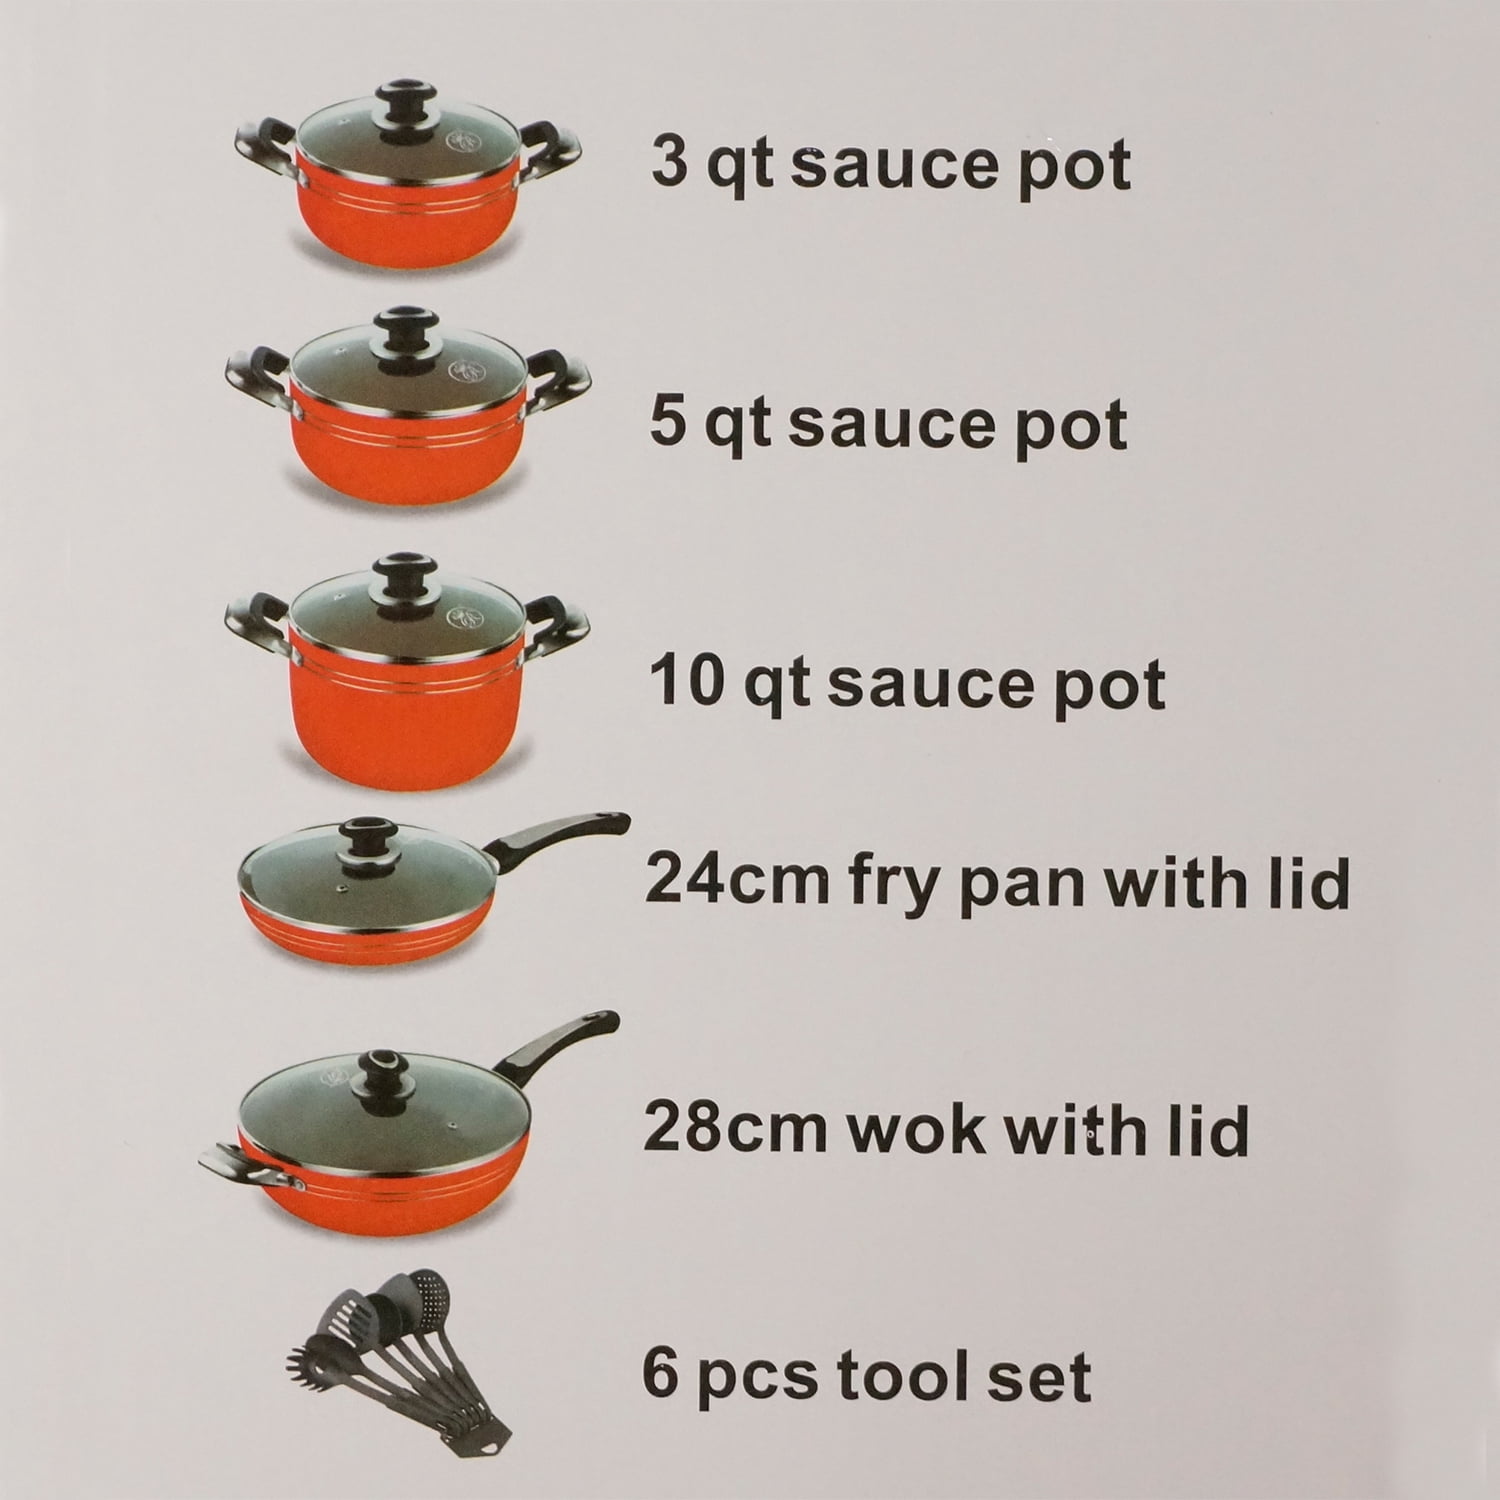  ROYDX Pots and Pans Set, 16 Piece Stainless Steel Kitchen Removable  Handle Cookware Set, Frying Saucepans with Lid, Stay-Cool Handles for All  Stoves, Dishwasher and Oven Safe, Camping: Home & Kitchen